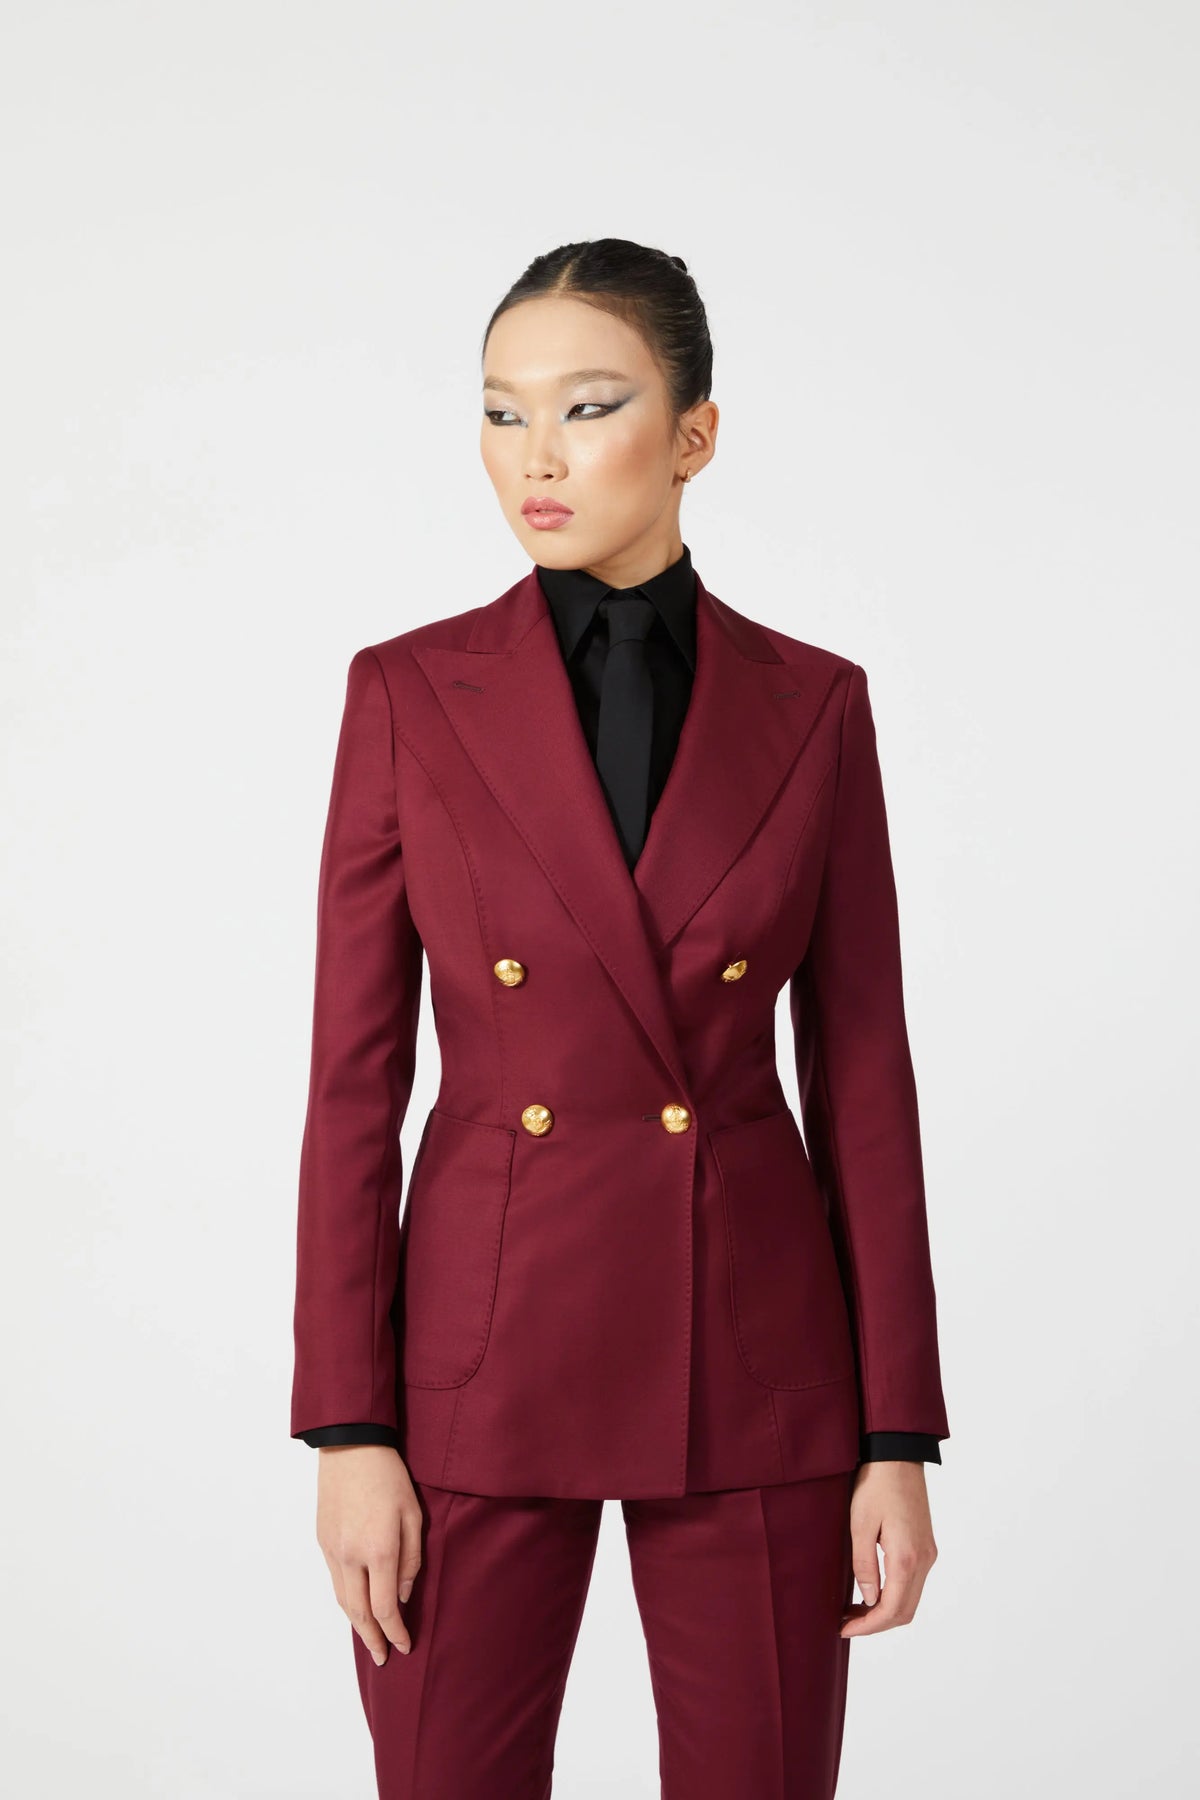 Merlot Double Breasted Suit with Gold Buttons - Alexandra Dobre